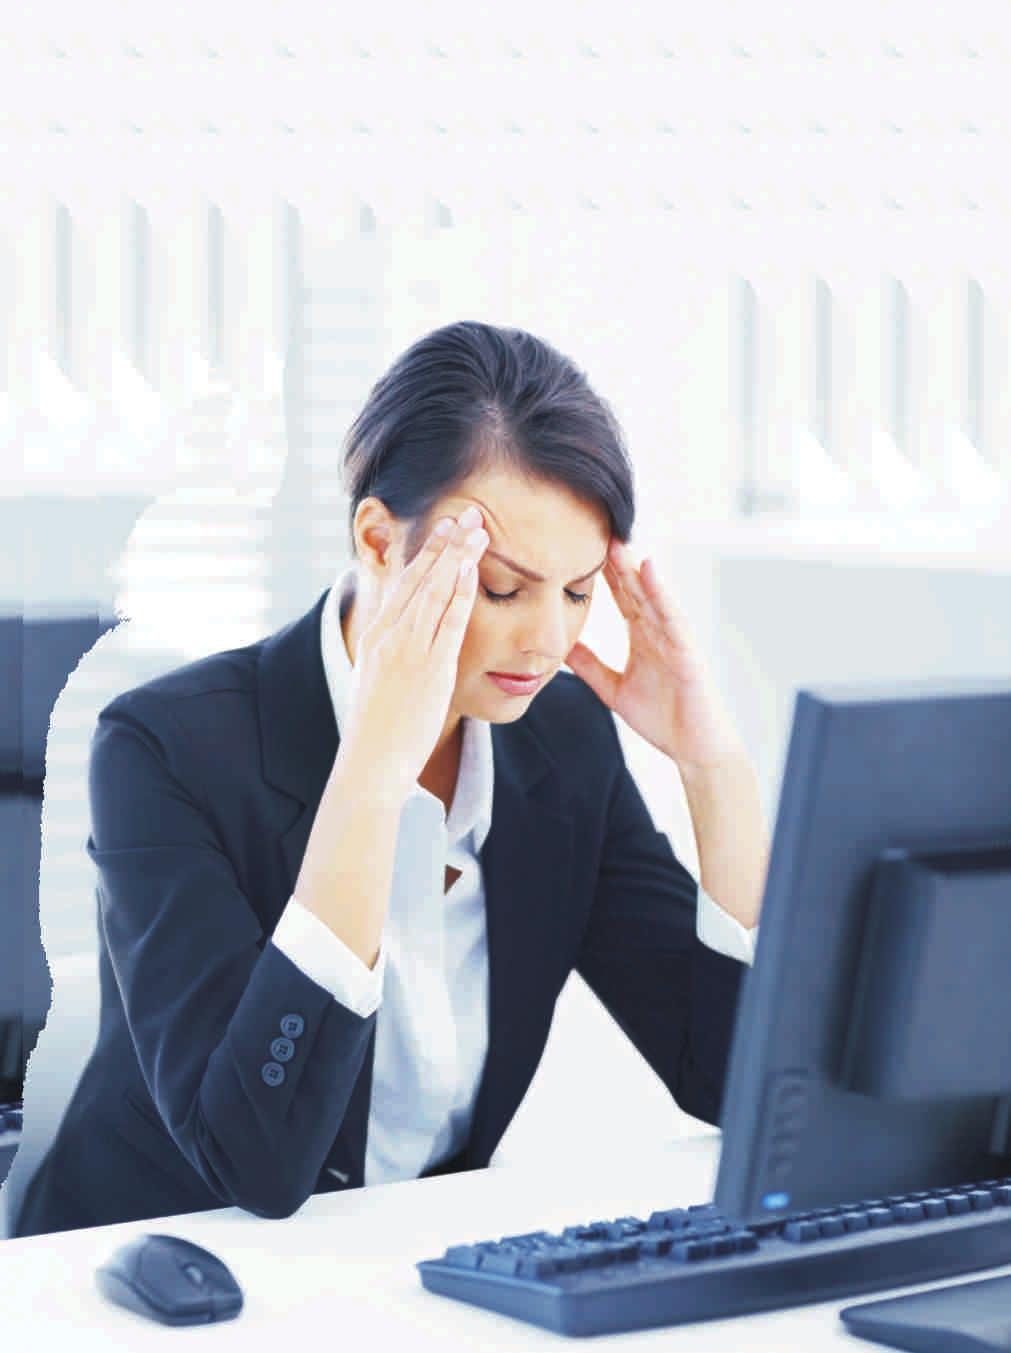 Work Stress and Resilience Everyone experiences work stress from